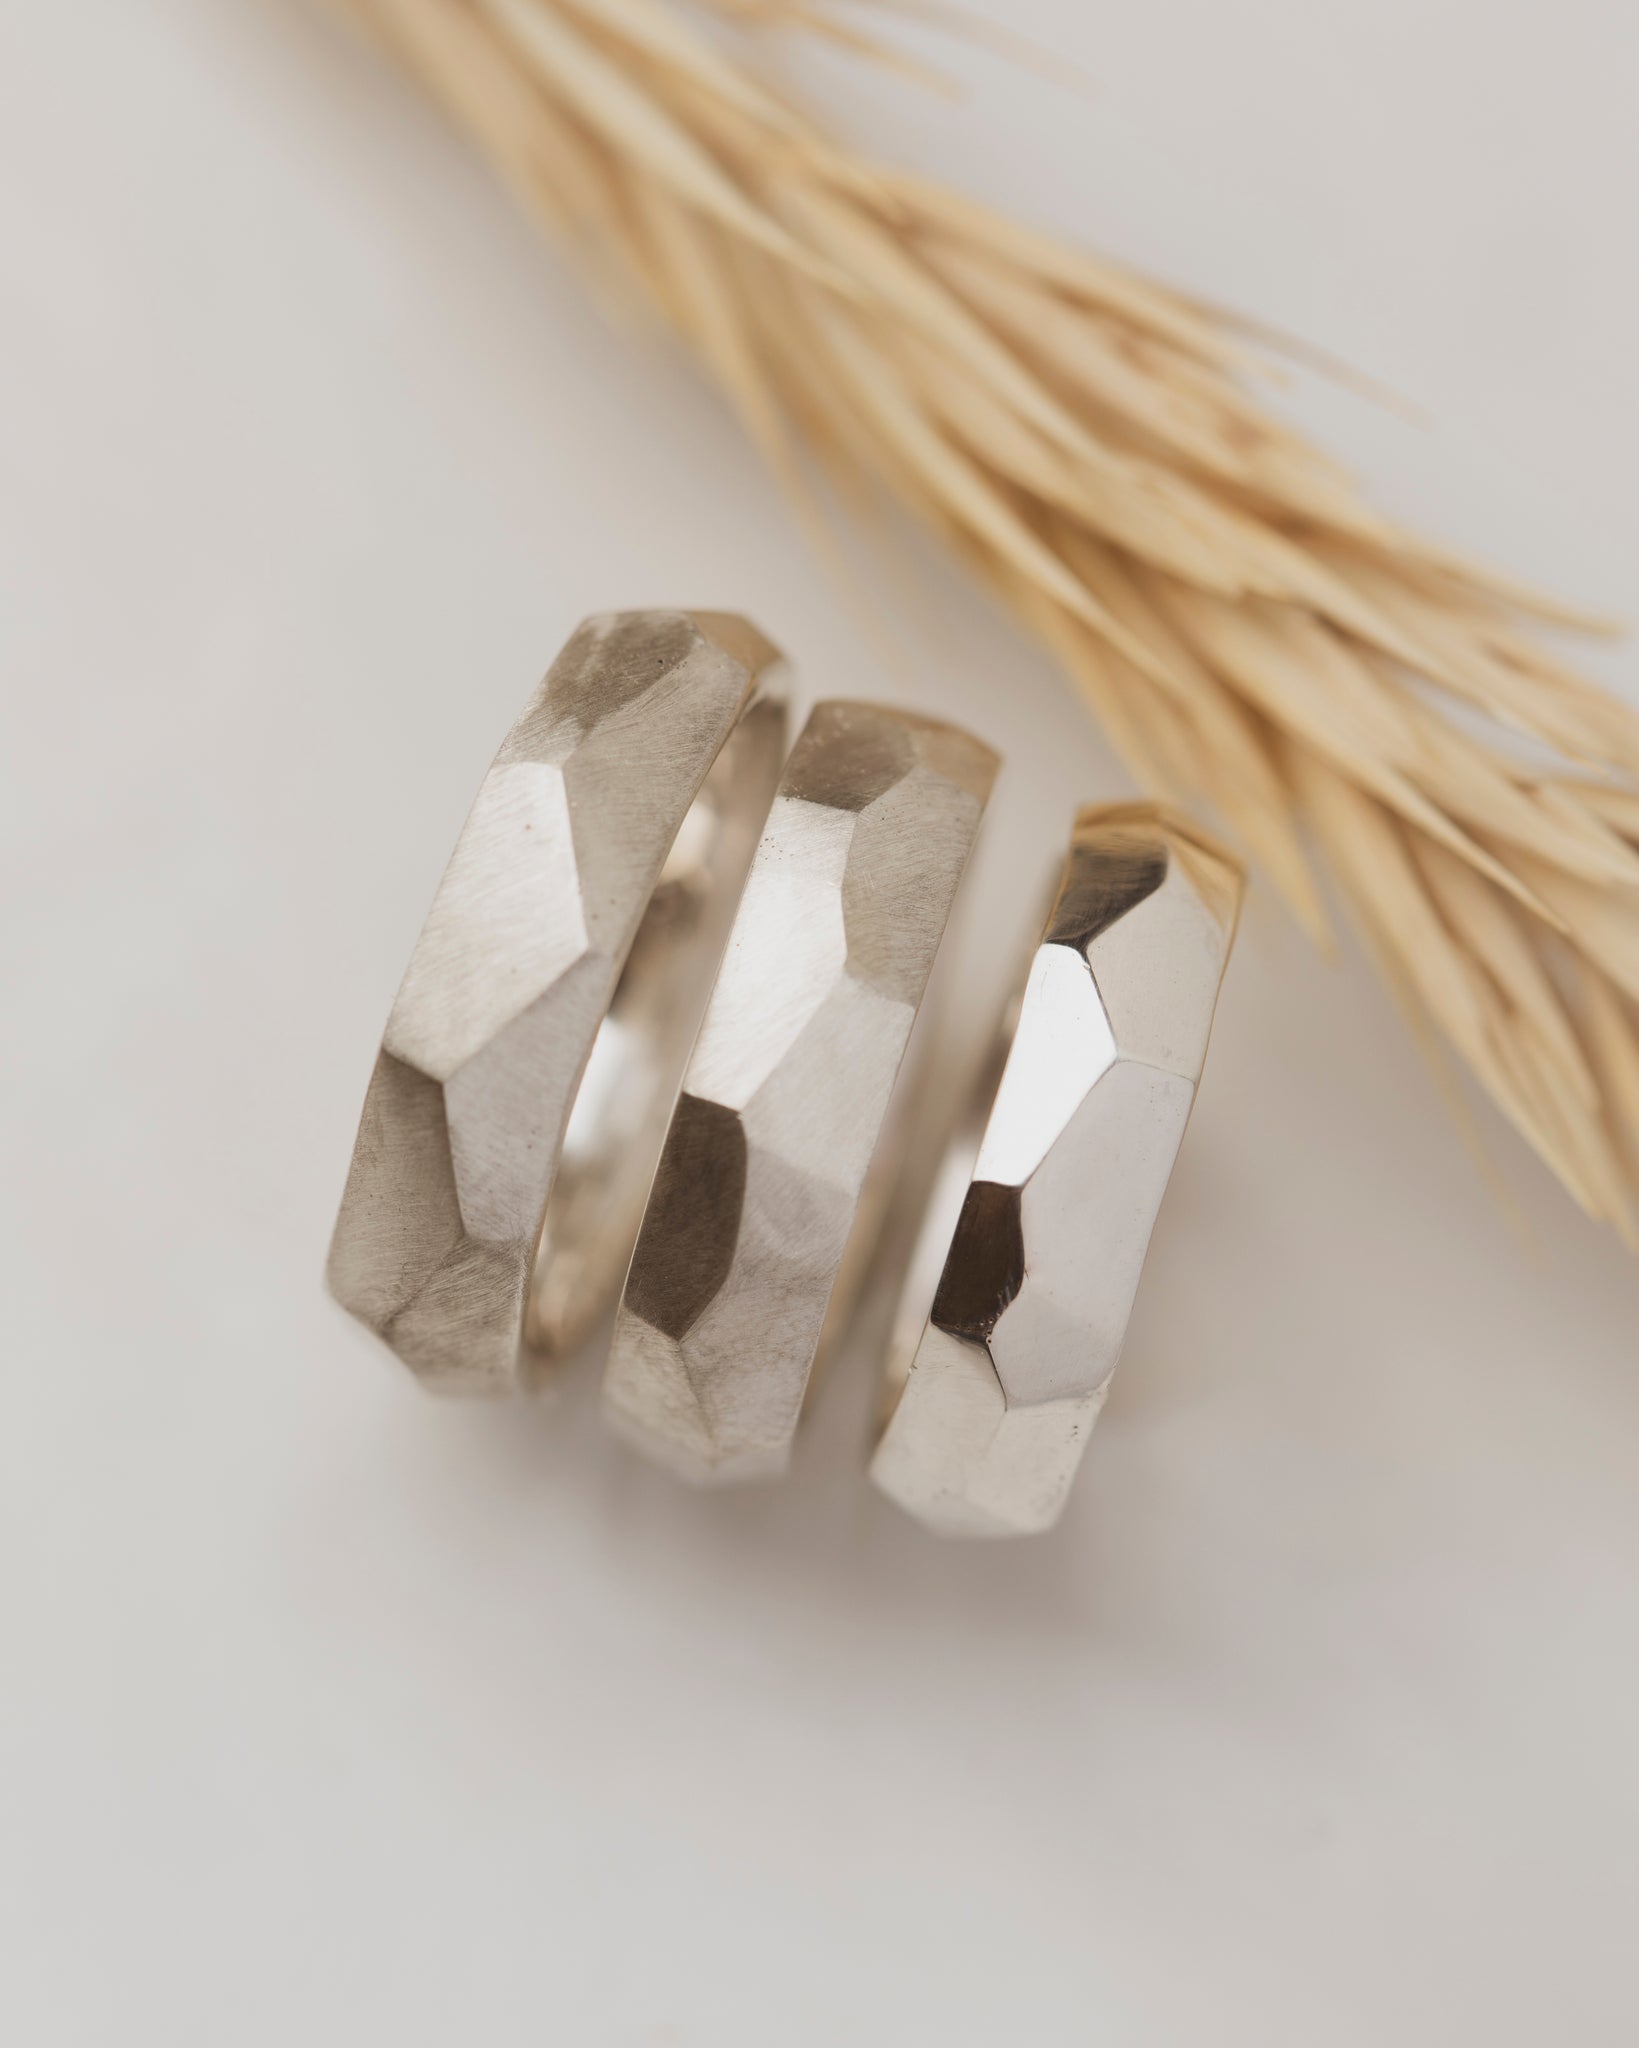 Multi-faceted sterling silver Vertex bands in brushed or polished finish